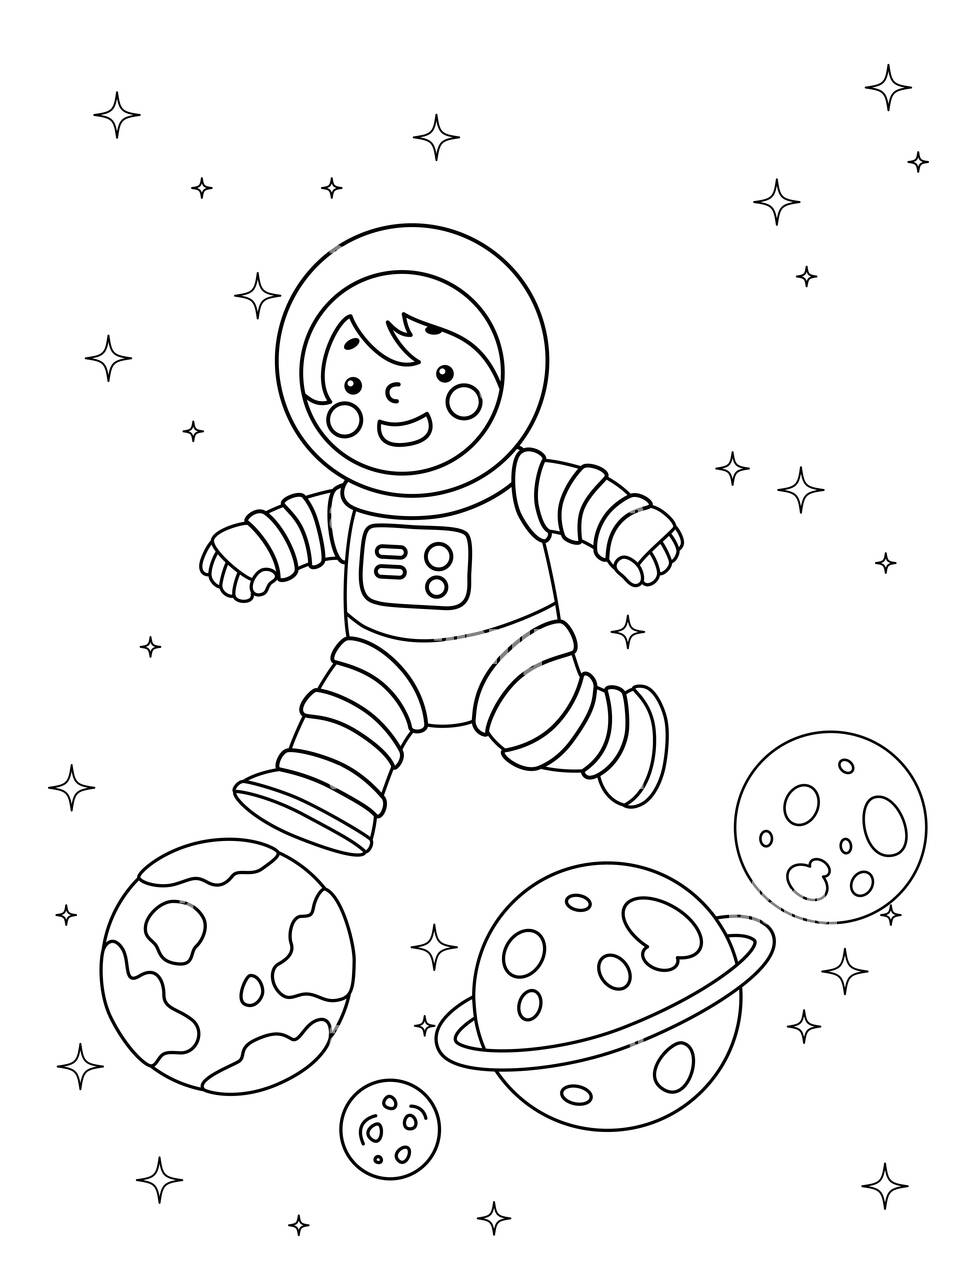 Astronaut Jump Coloring Page